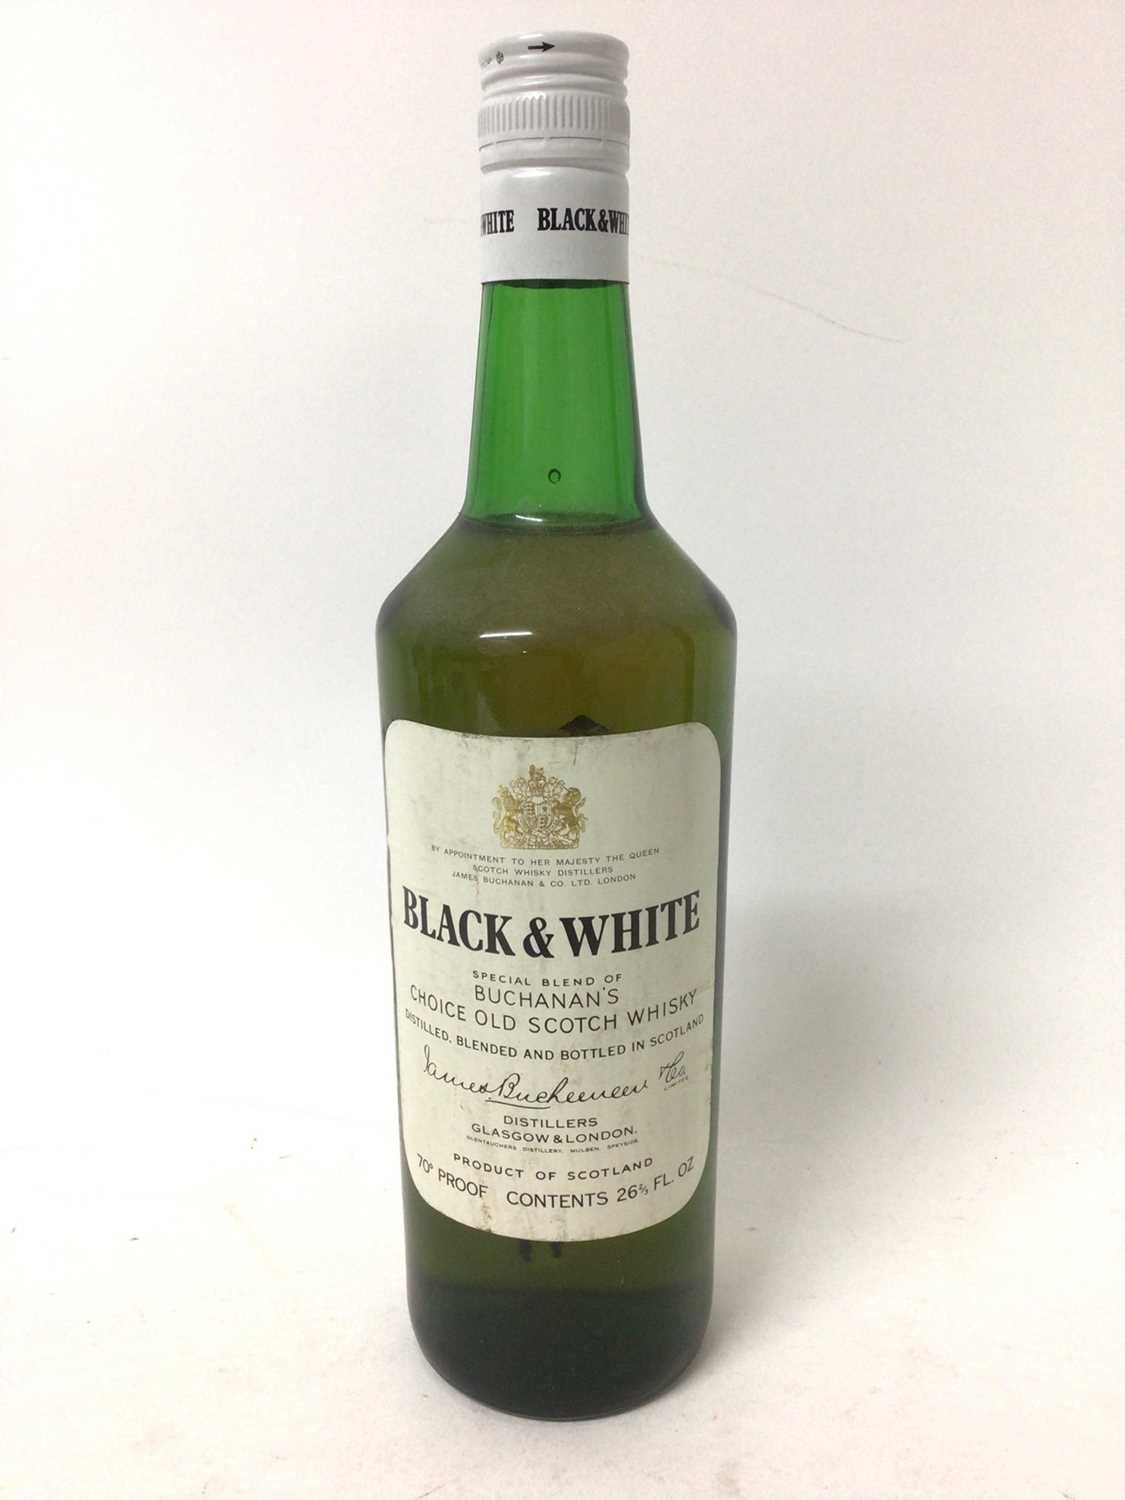 Black & White, Buchanan's Choice Old Scotch Whisky, screw top, 70 proof, 26 2/3 fl. ozs, one bottle - Image 2 of 2